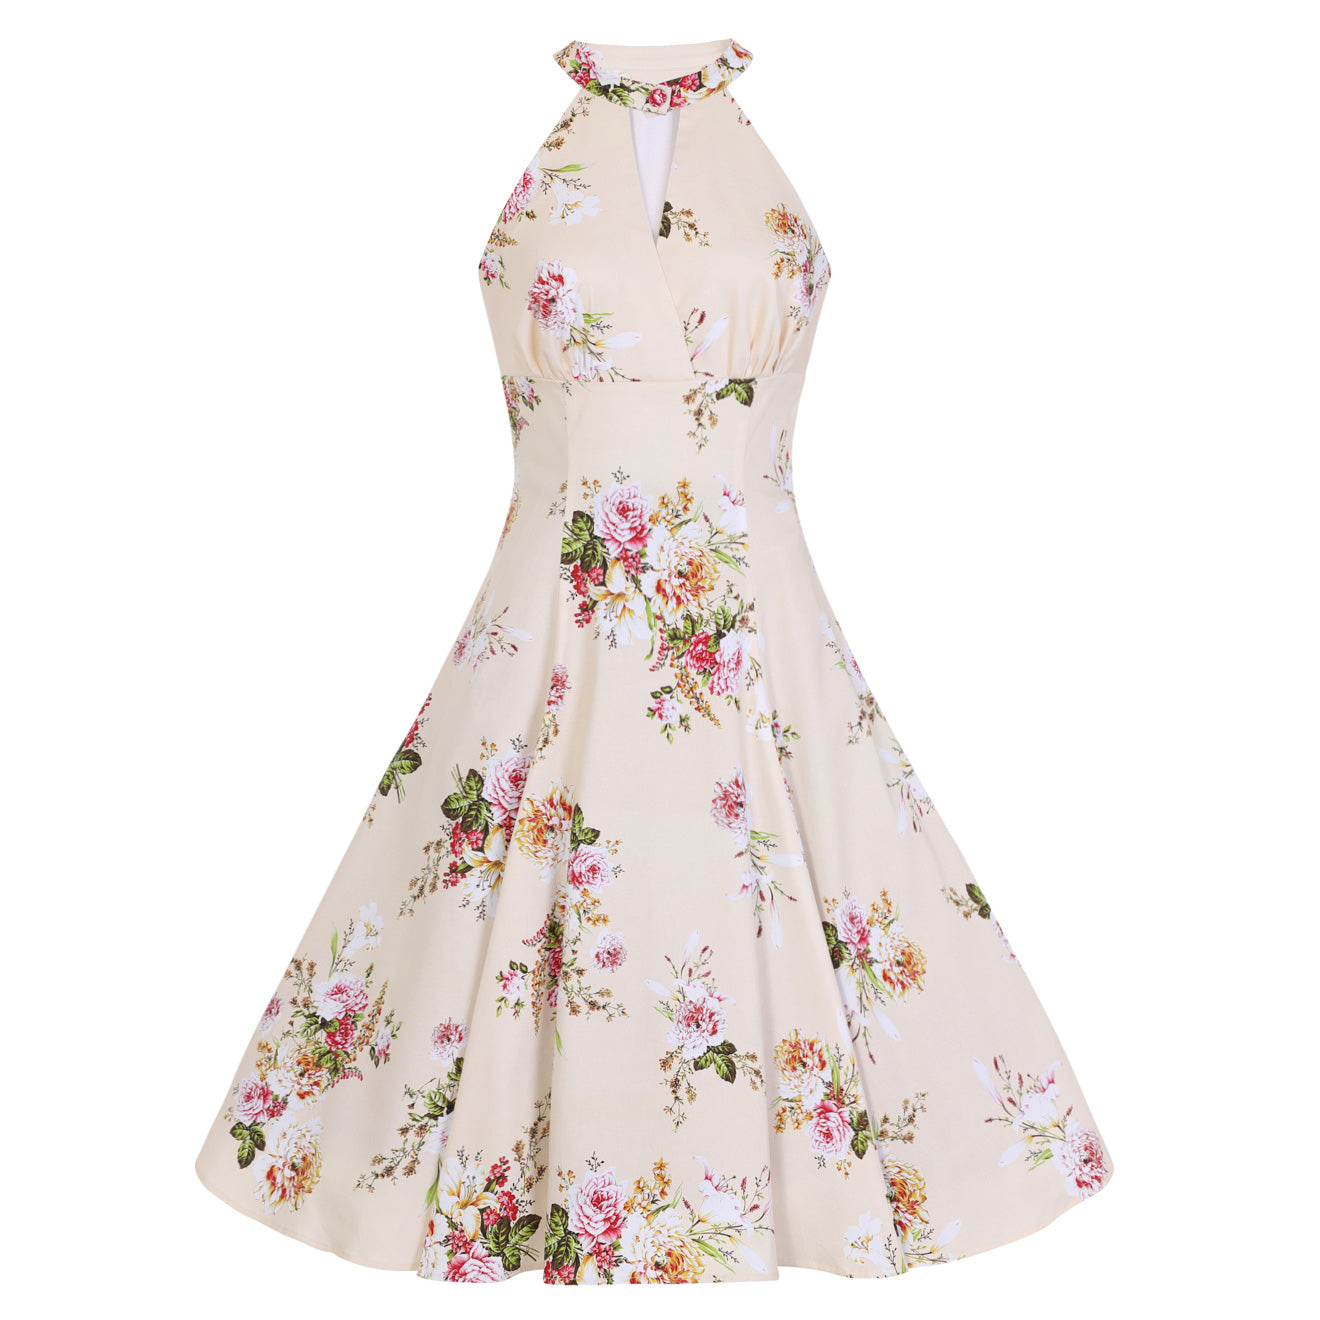 Cream And Floral Print Halter Neck 50s Swing Dress - Pretty Kitty Fashion